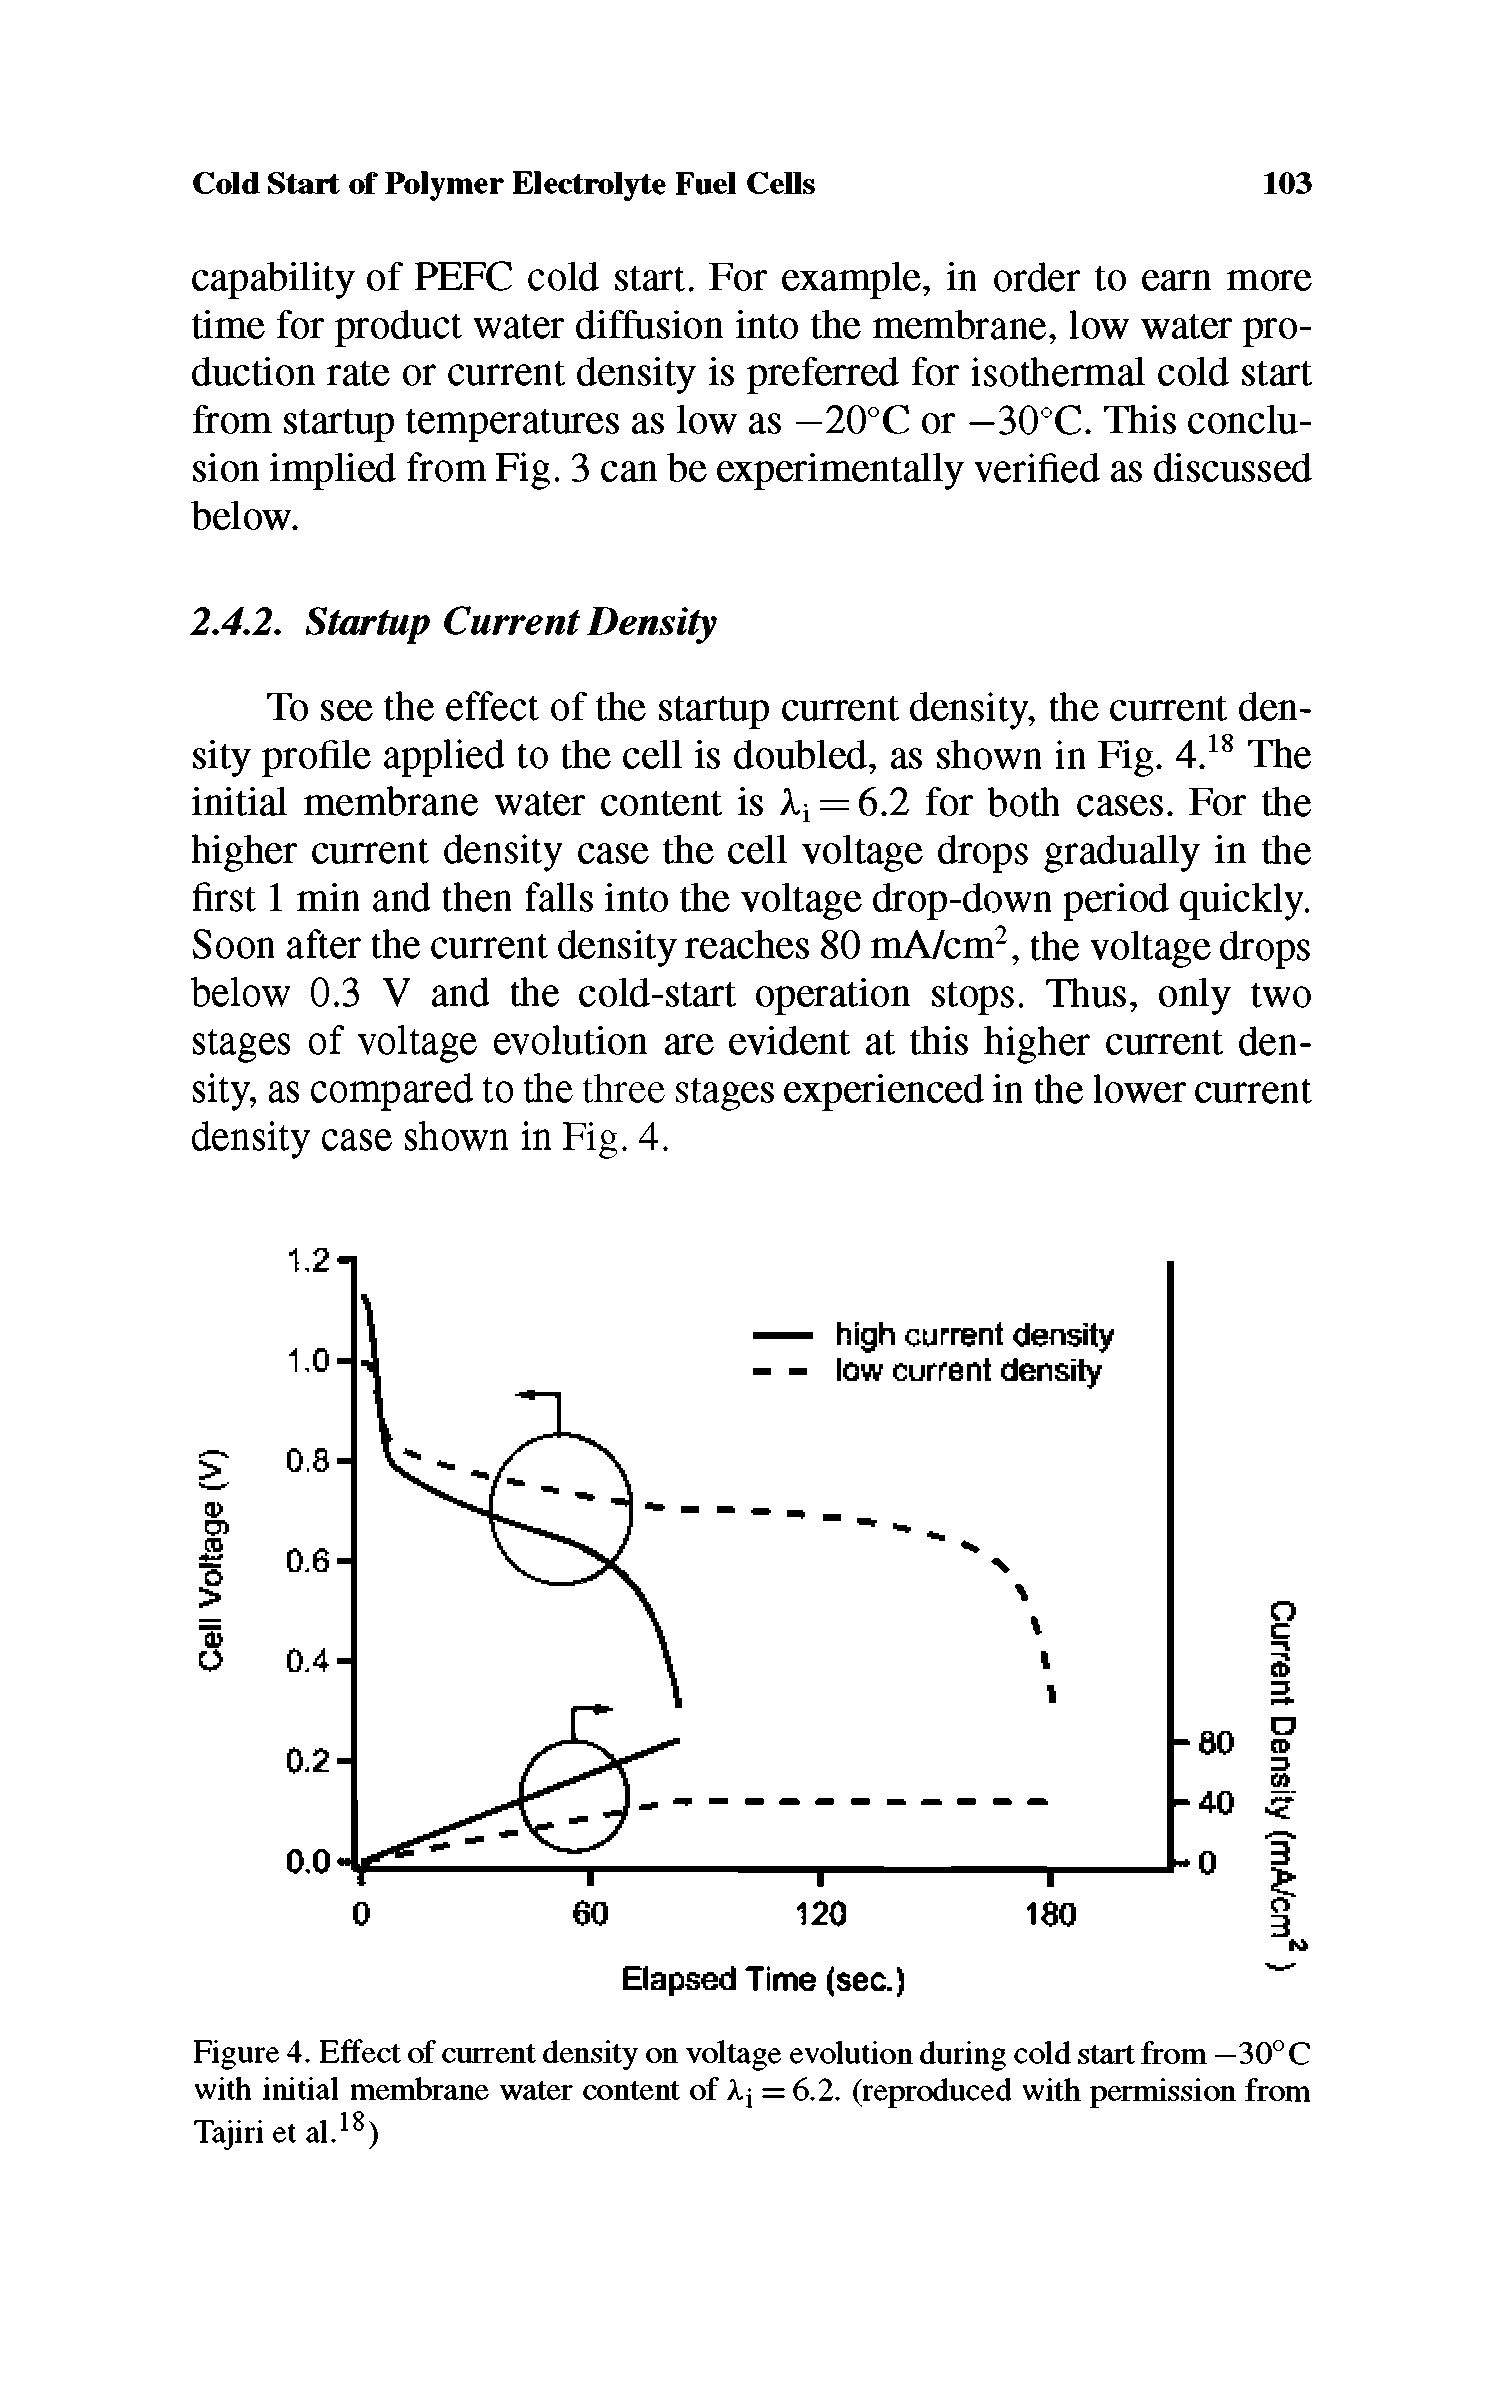 Figure 4. Effect of current density on voltage evolution during cold start from —30° C with initial membrane water content of /.j = 6.2. (reproduced with permission from Tajiri et al.18)...